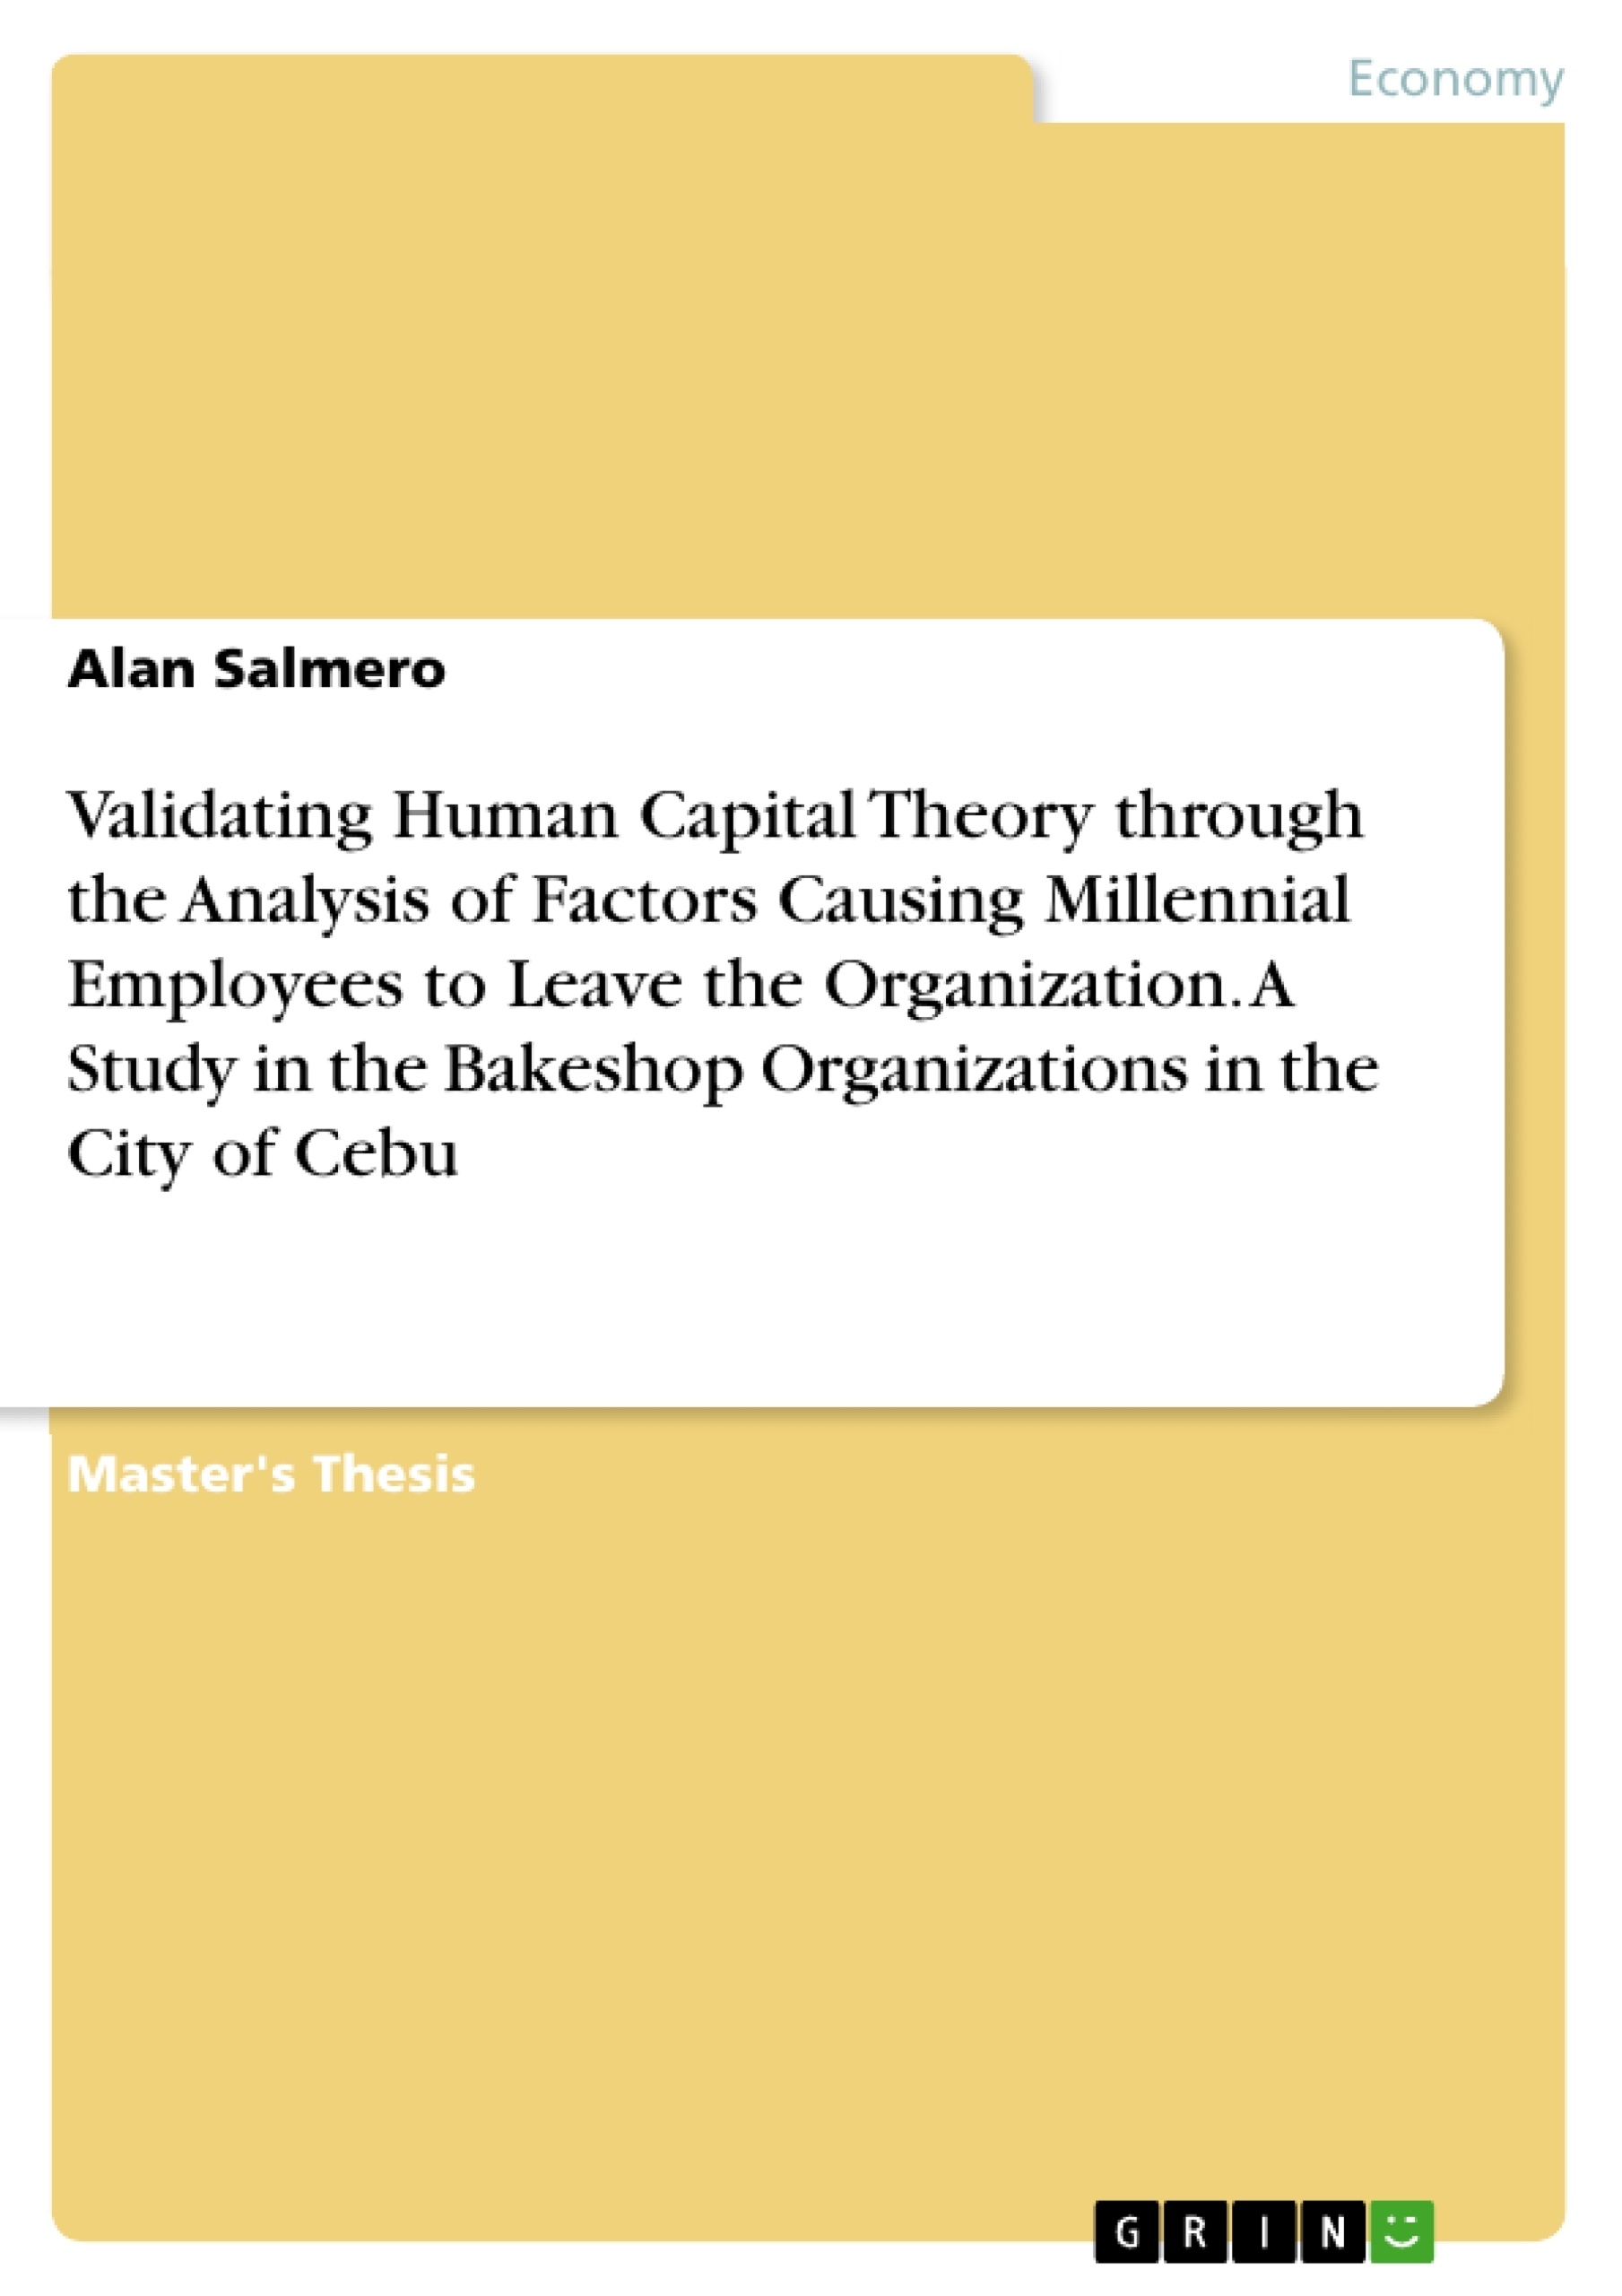 Title: Validating Human Capital Theory through the Analysis of Factors Causing Millennial Employees to Leave the Organization. A Study in the Bakeshop Organizations in the City of Cebu